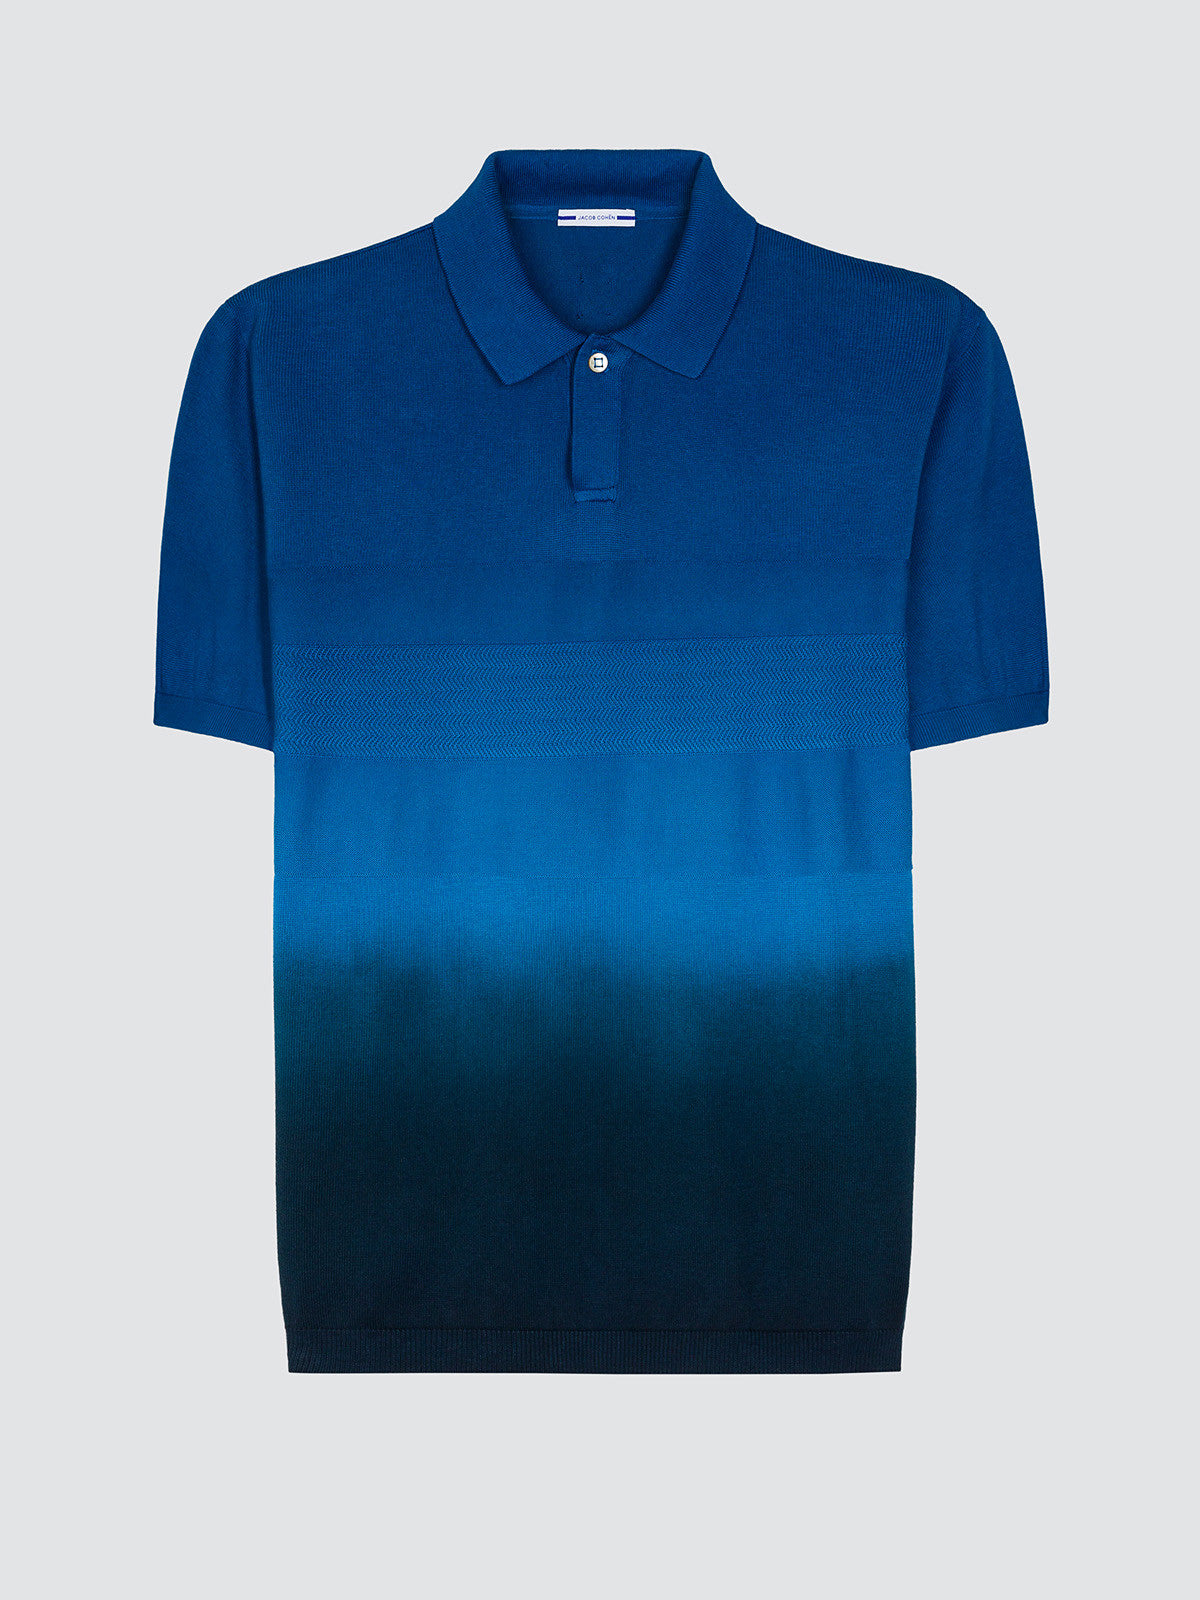 BLUE SHADED COTTON KNIT POLO SHIRT